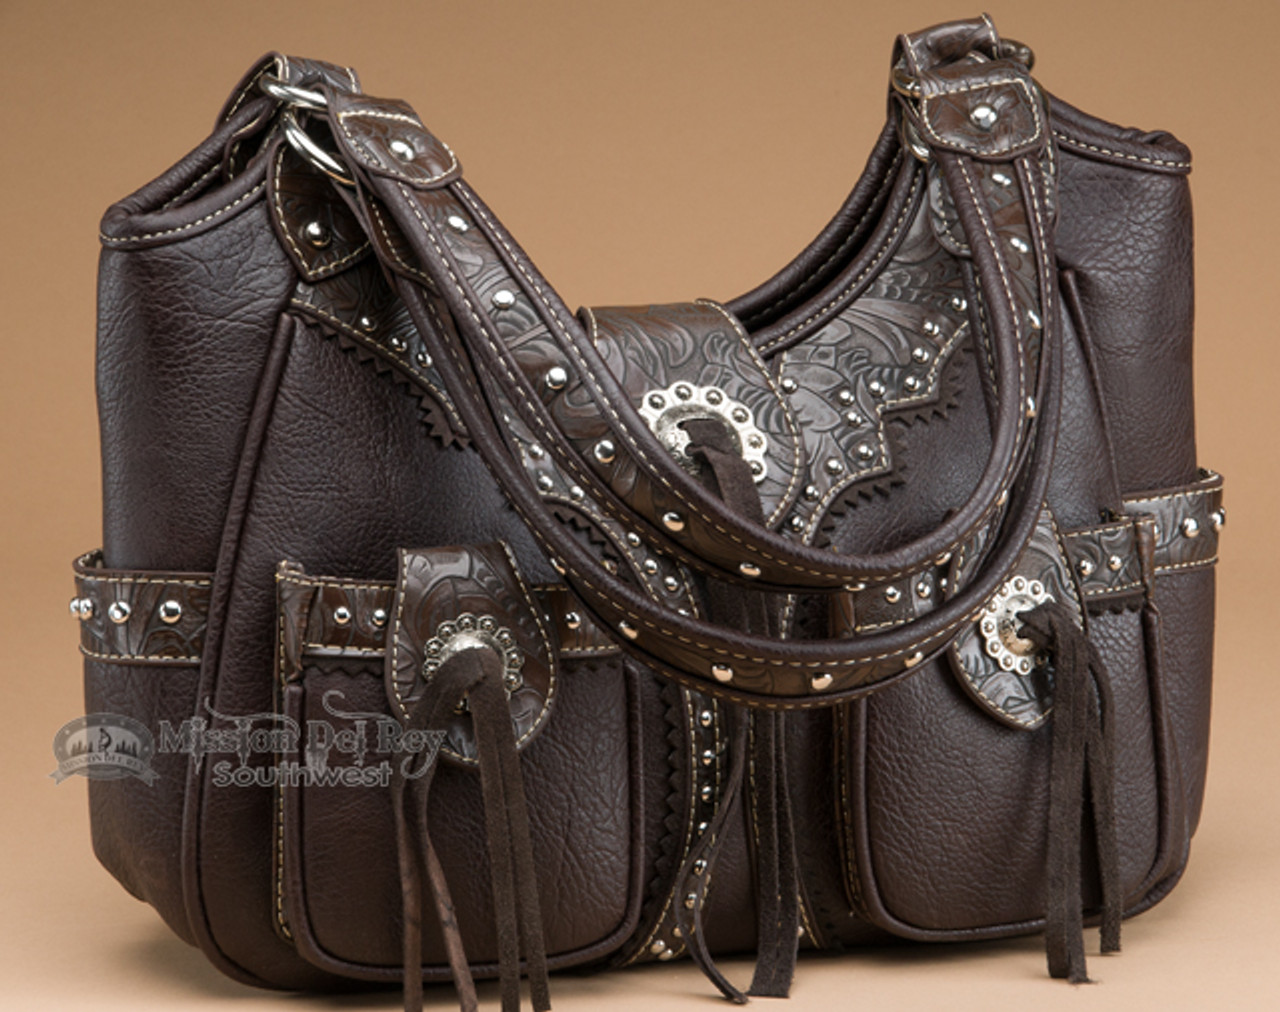 Delaney Leather Crossbody | Concealed Carry Purse for Women –  www.itsinthebagboutique.com